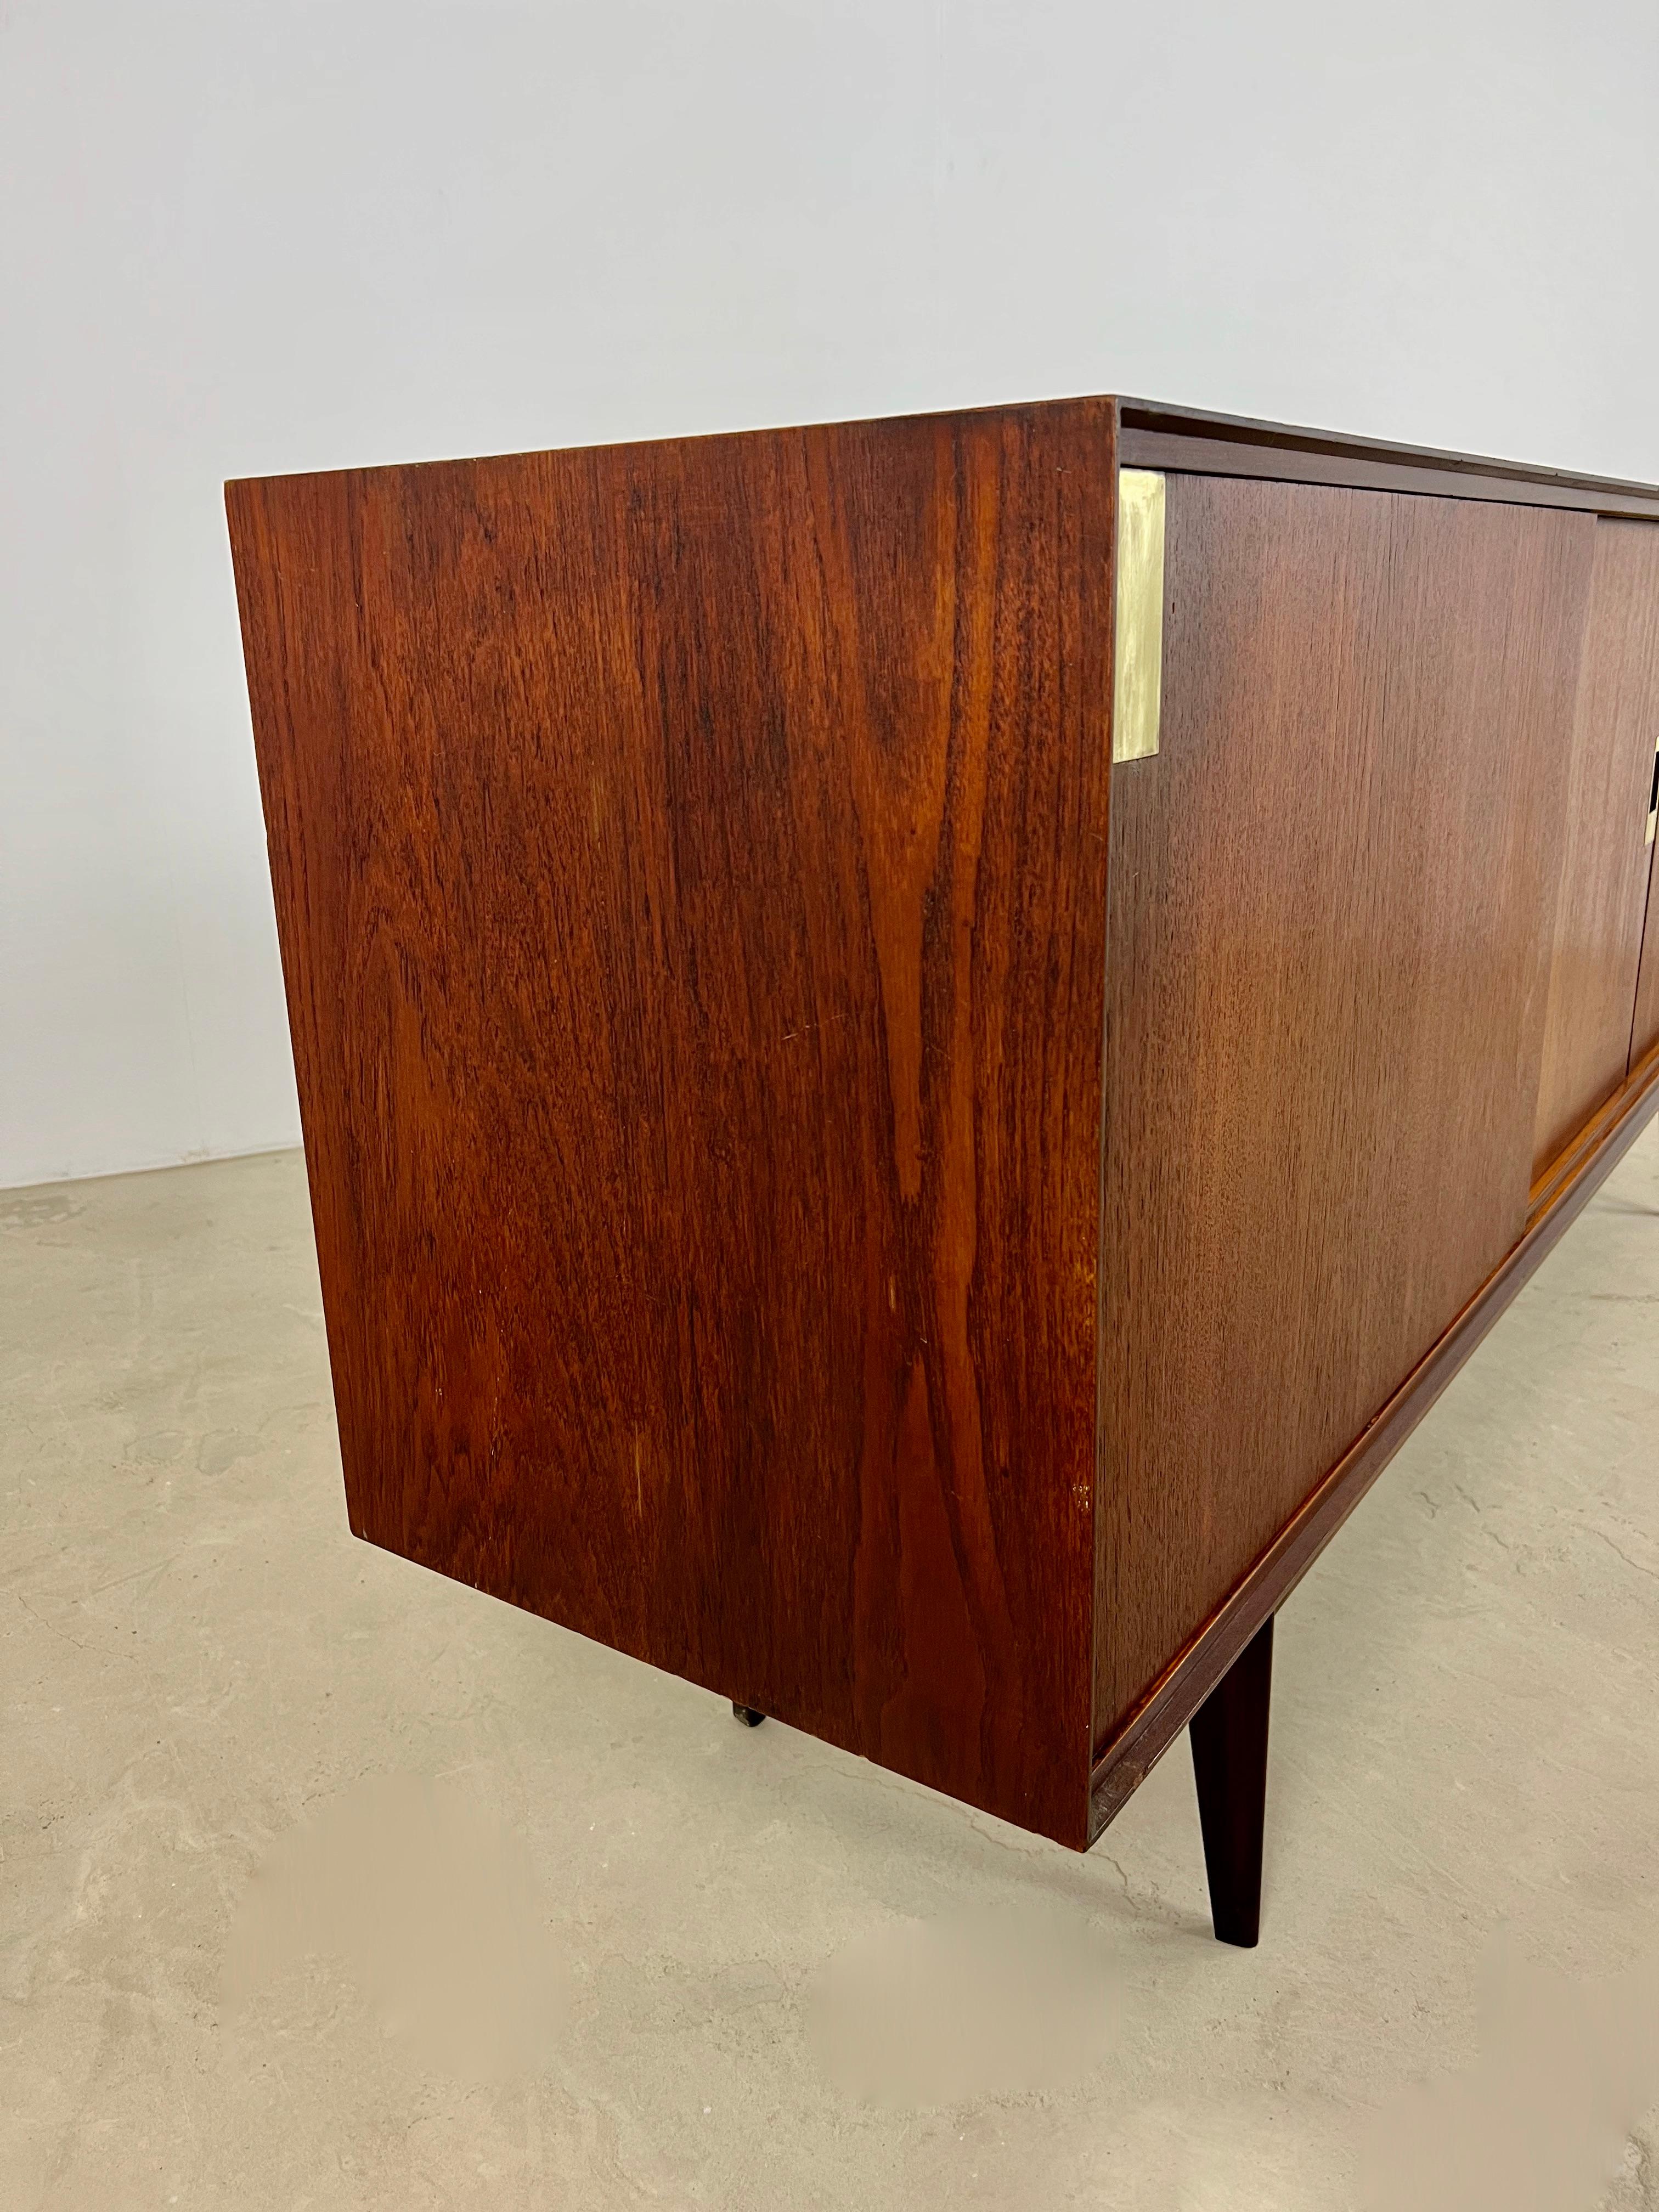 Wooden sideboard, composed of 3 doors, a sliding door, 5 drawers, a key. Wear due to time and age of the sideboard.